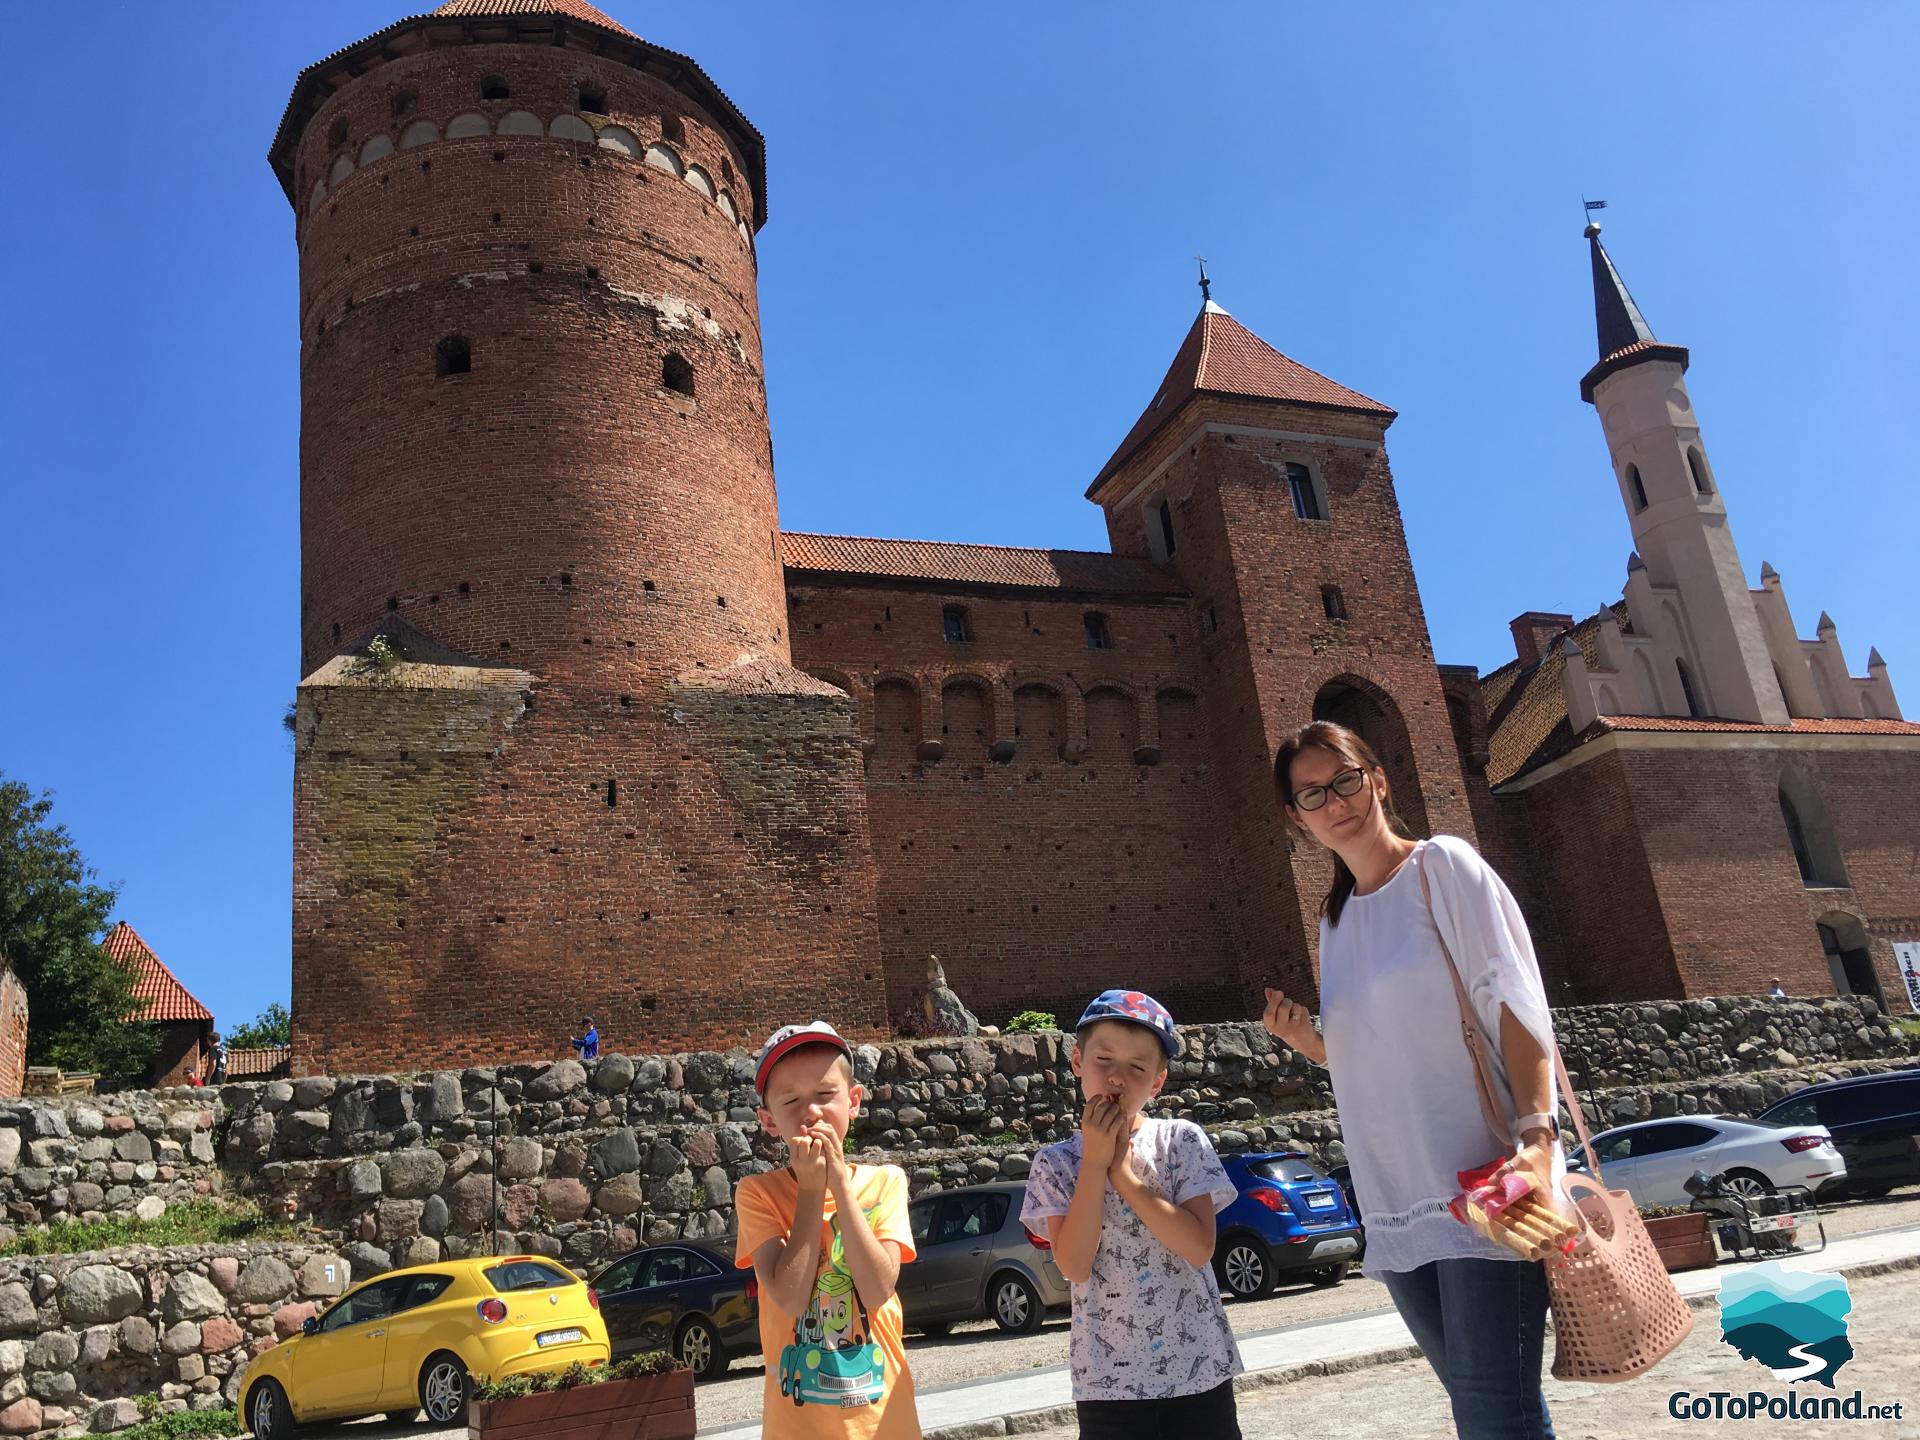 a brick castle, in front of it there is a woman and two boys